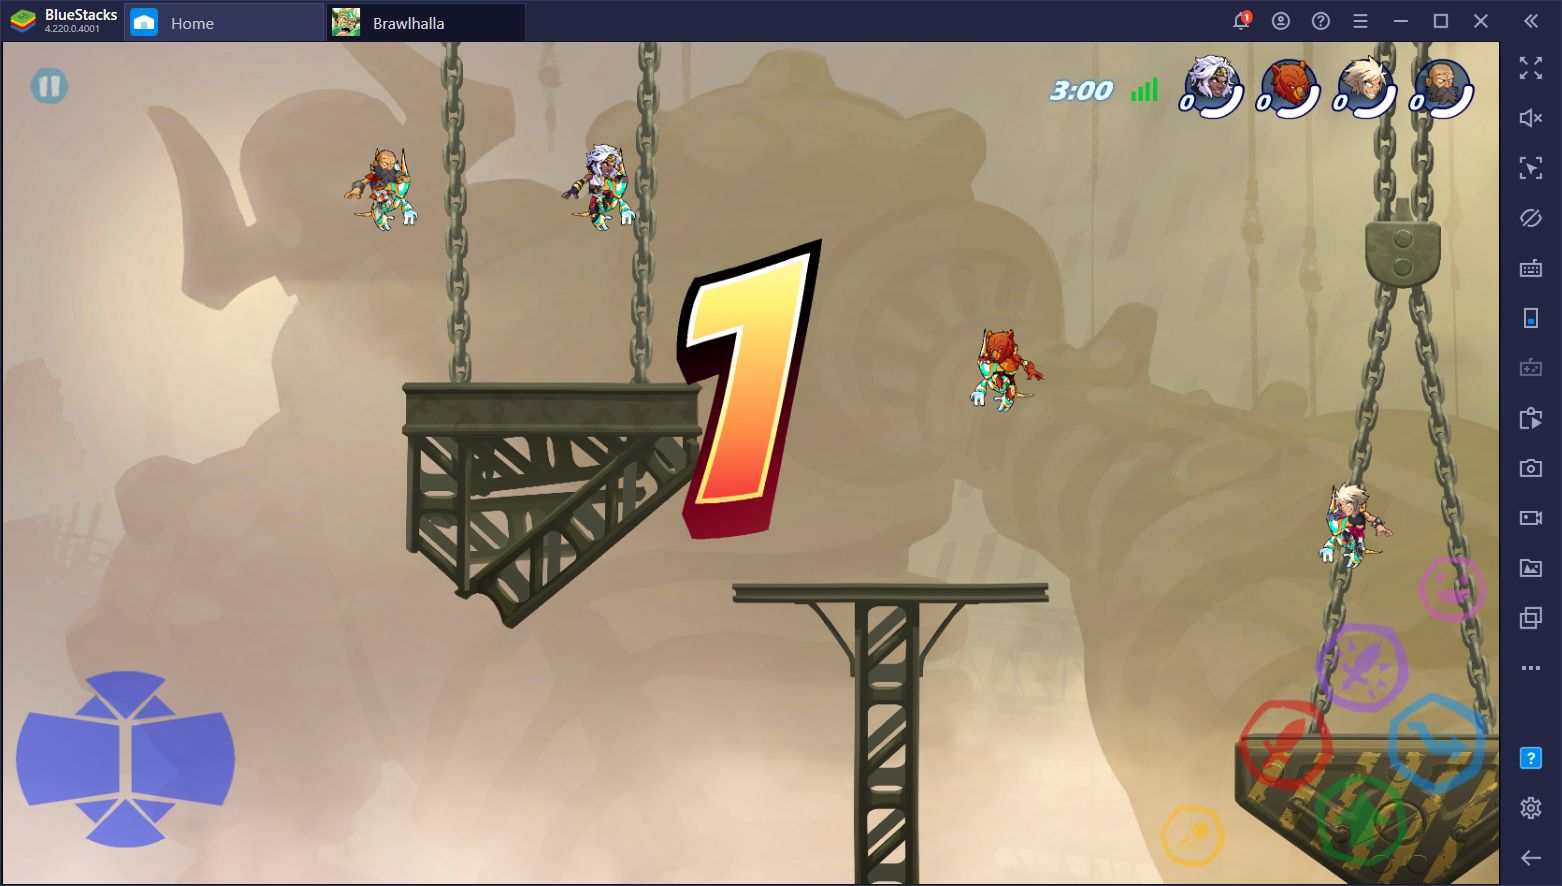 Brawlhalla on BlueStacks - Our First Impressions of the New Mobile Version